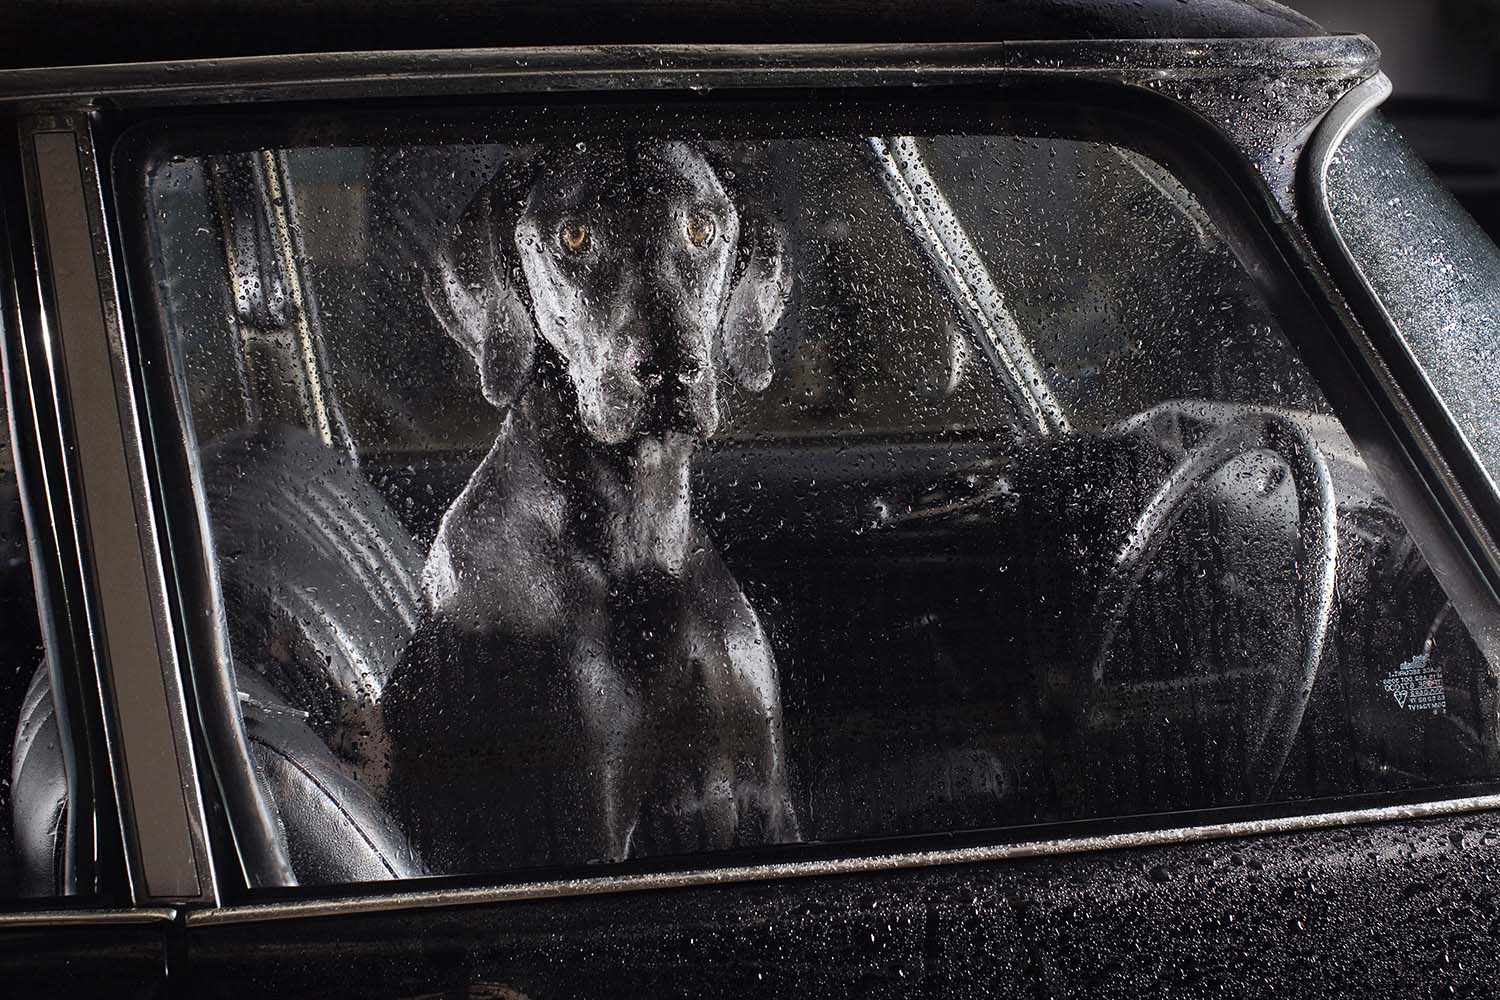 Martin Usborne, The Silence of Dogs in Cars Published by Hoxton Mini Press